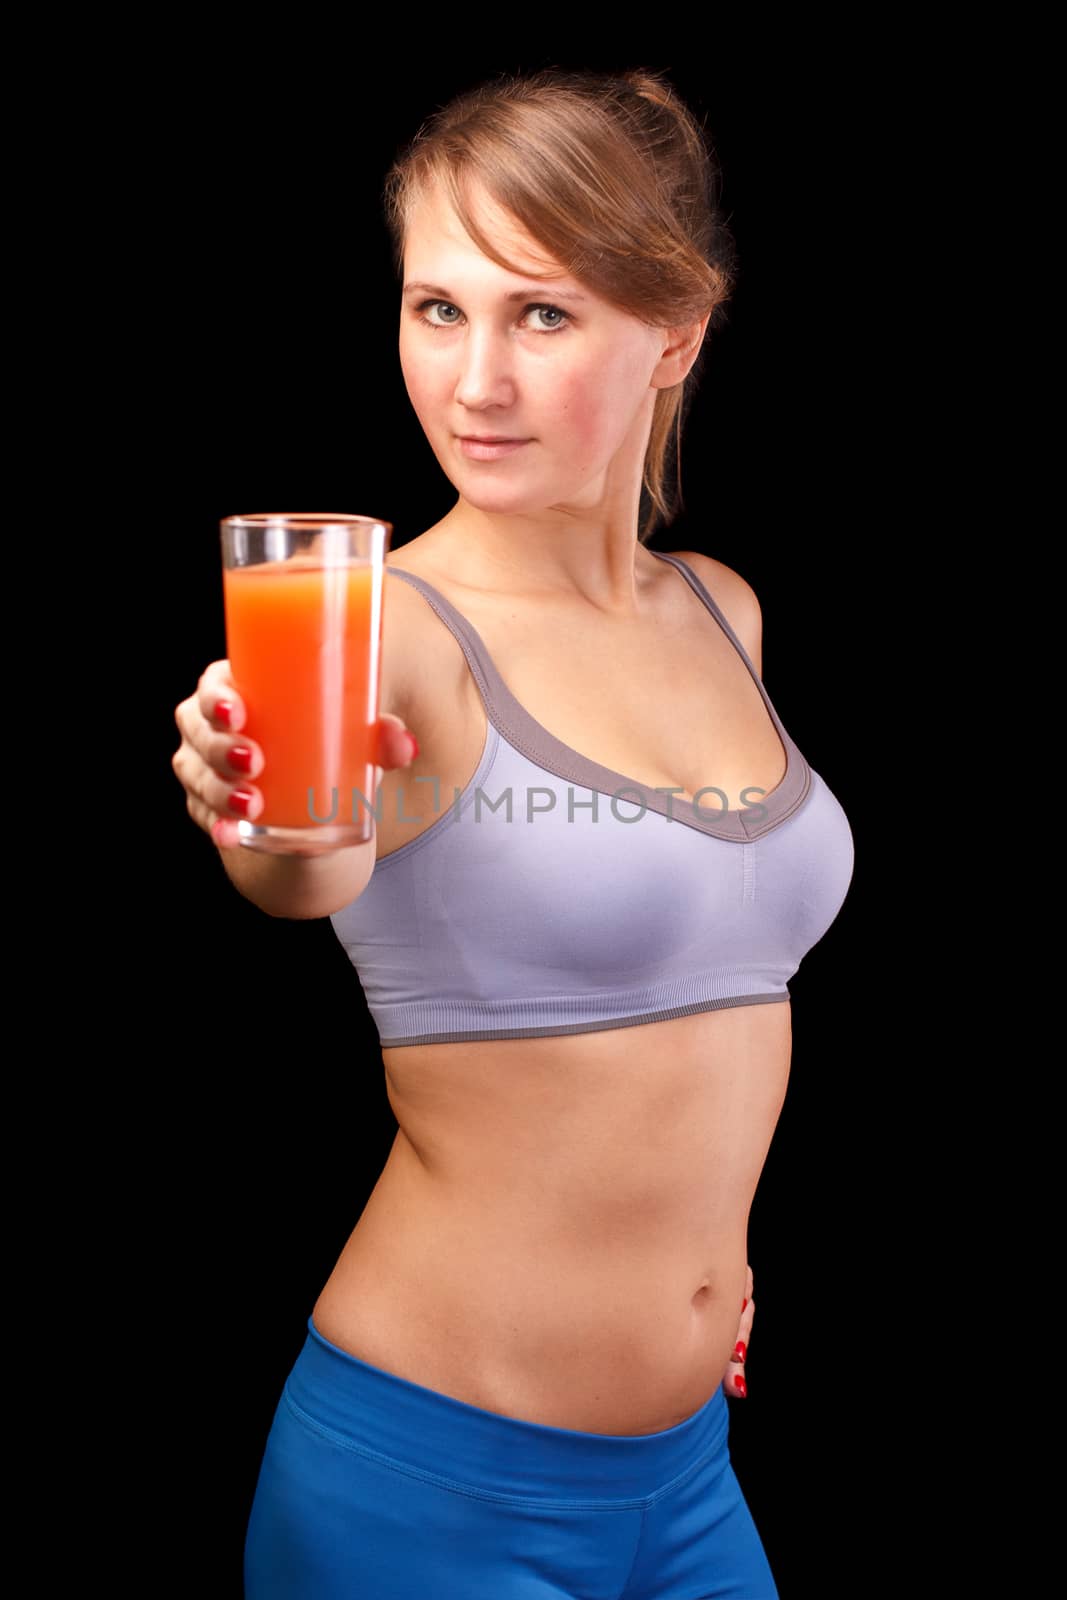 The girl who was engaged in sports, is on a black background with a glass of grapefruit juice.